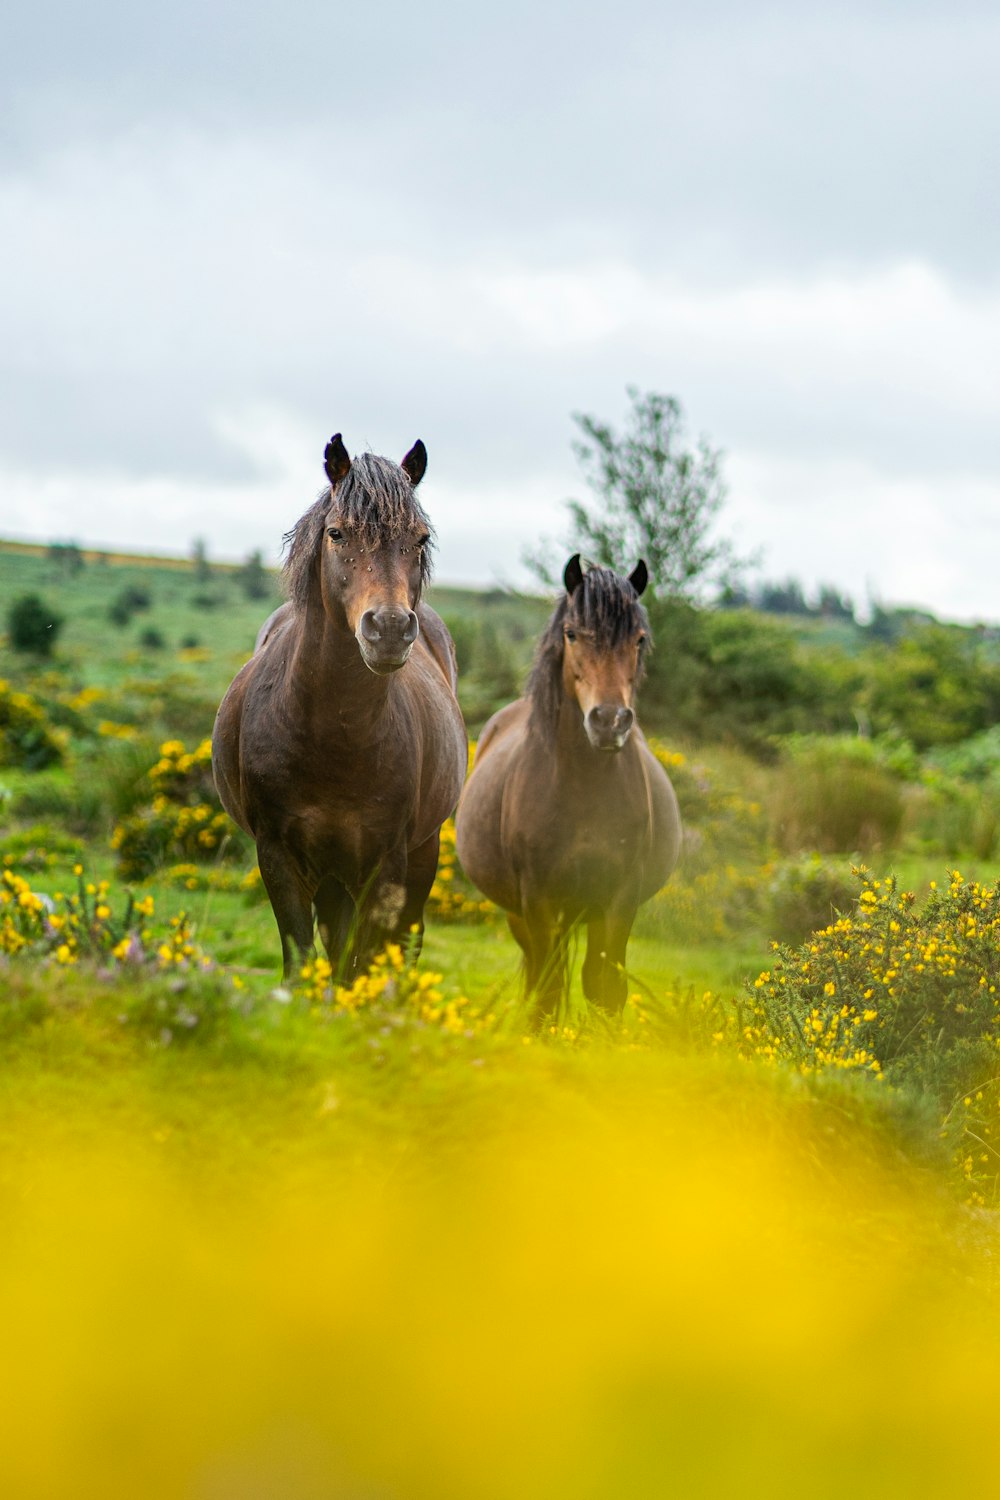 two brown horses standing next to each other on a lush green field